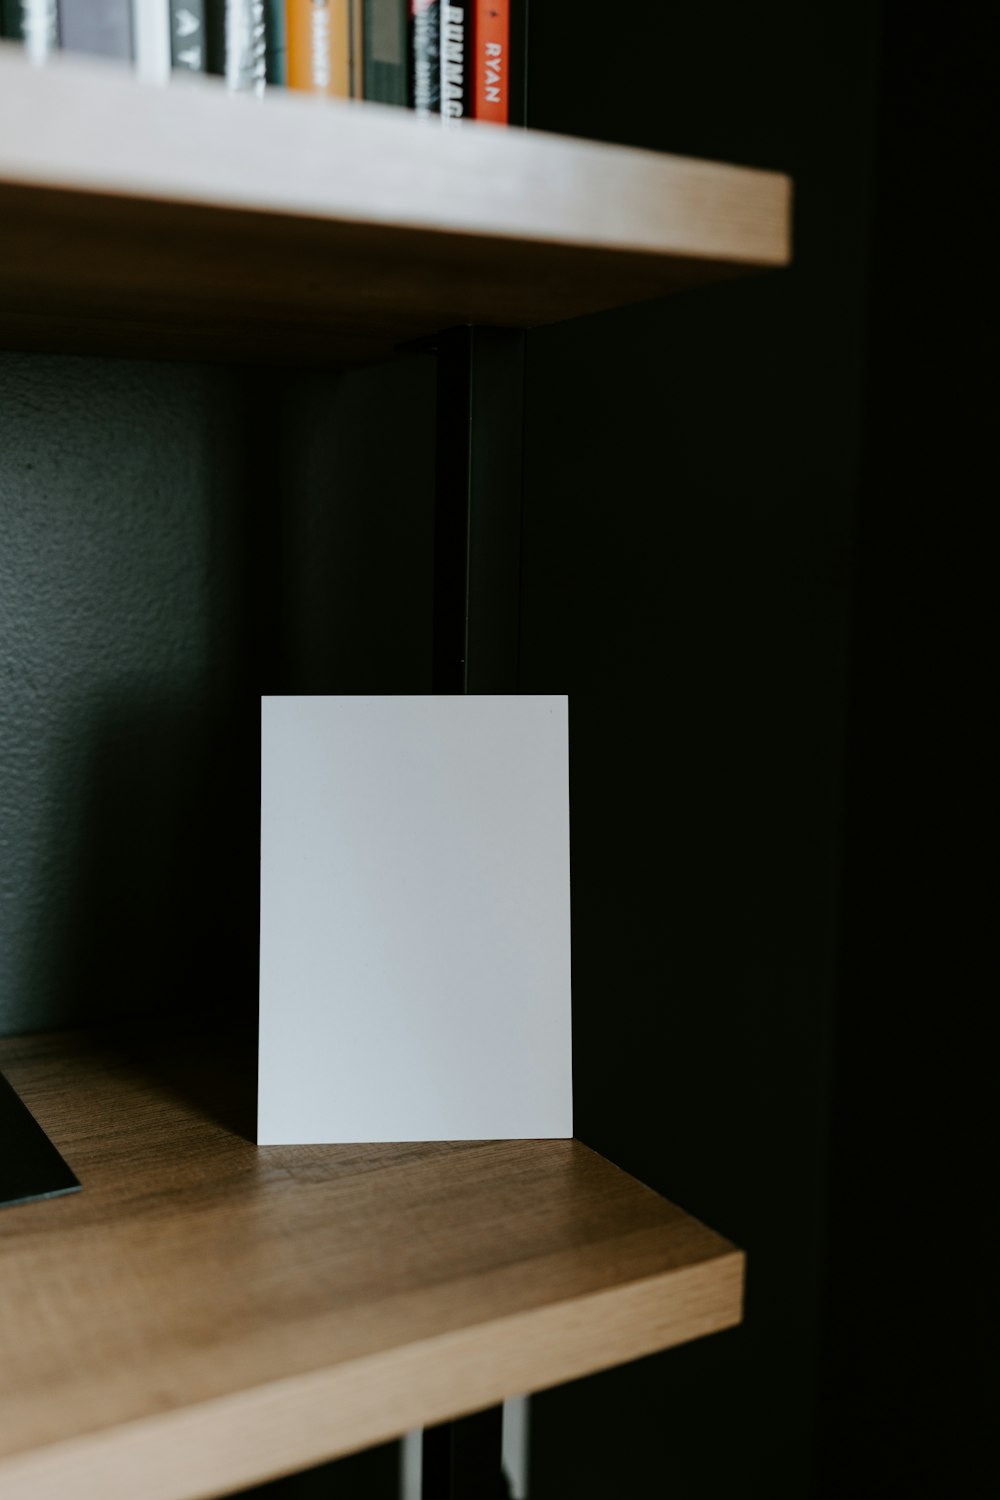 a blank card sitting on top of a wooden shelf